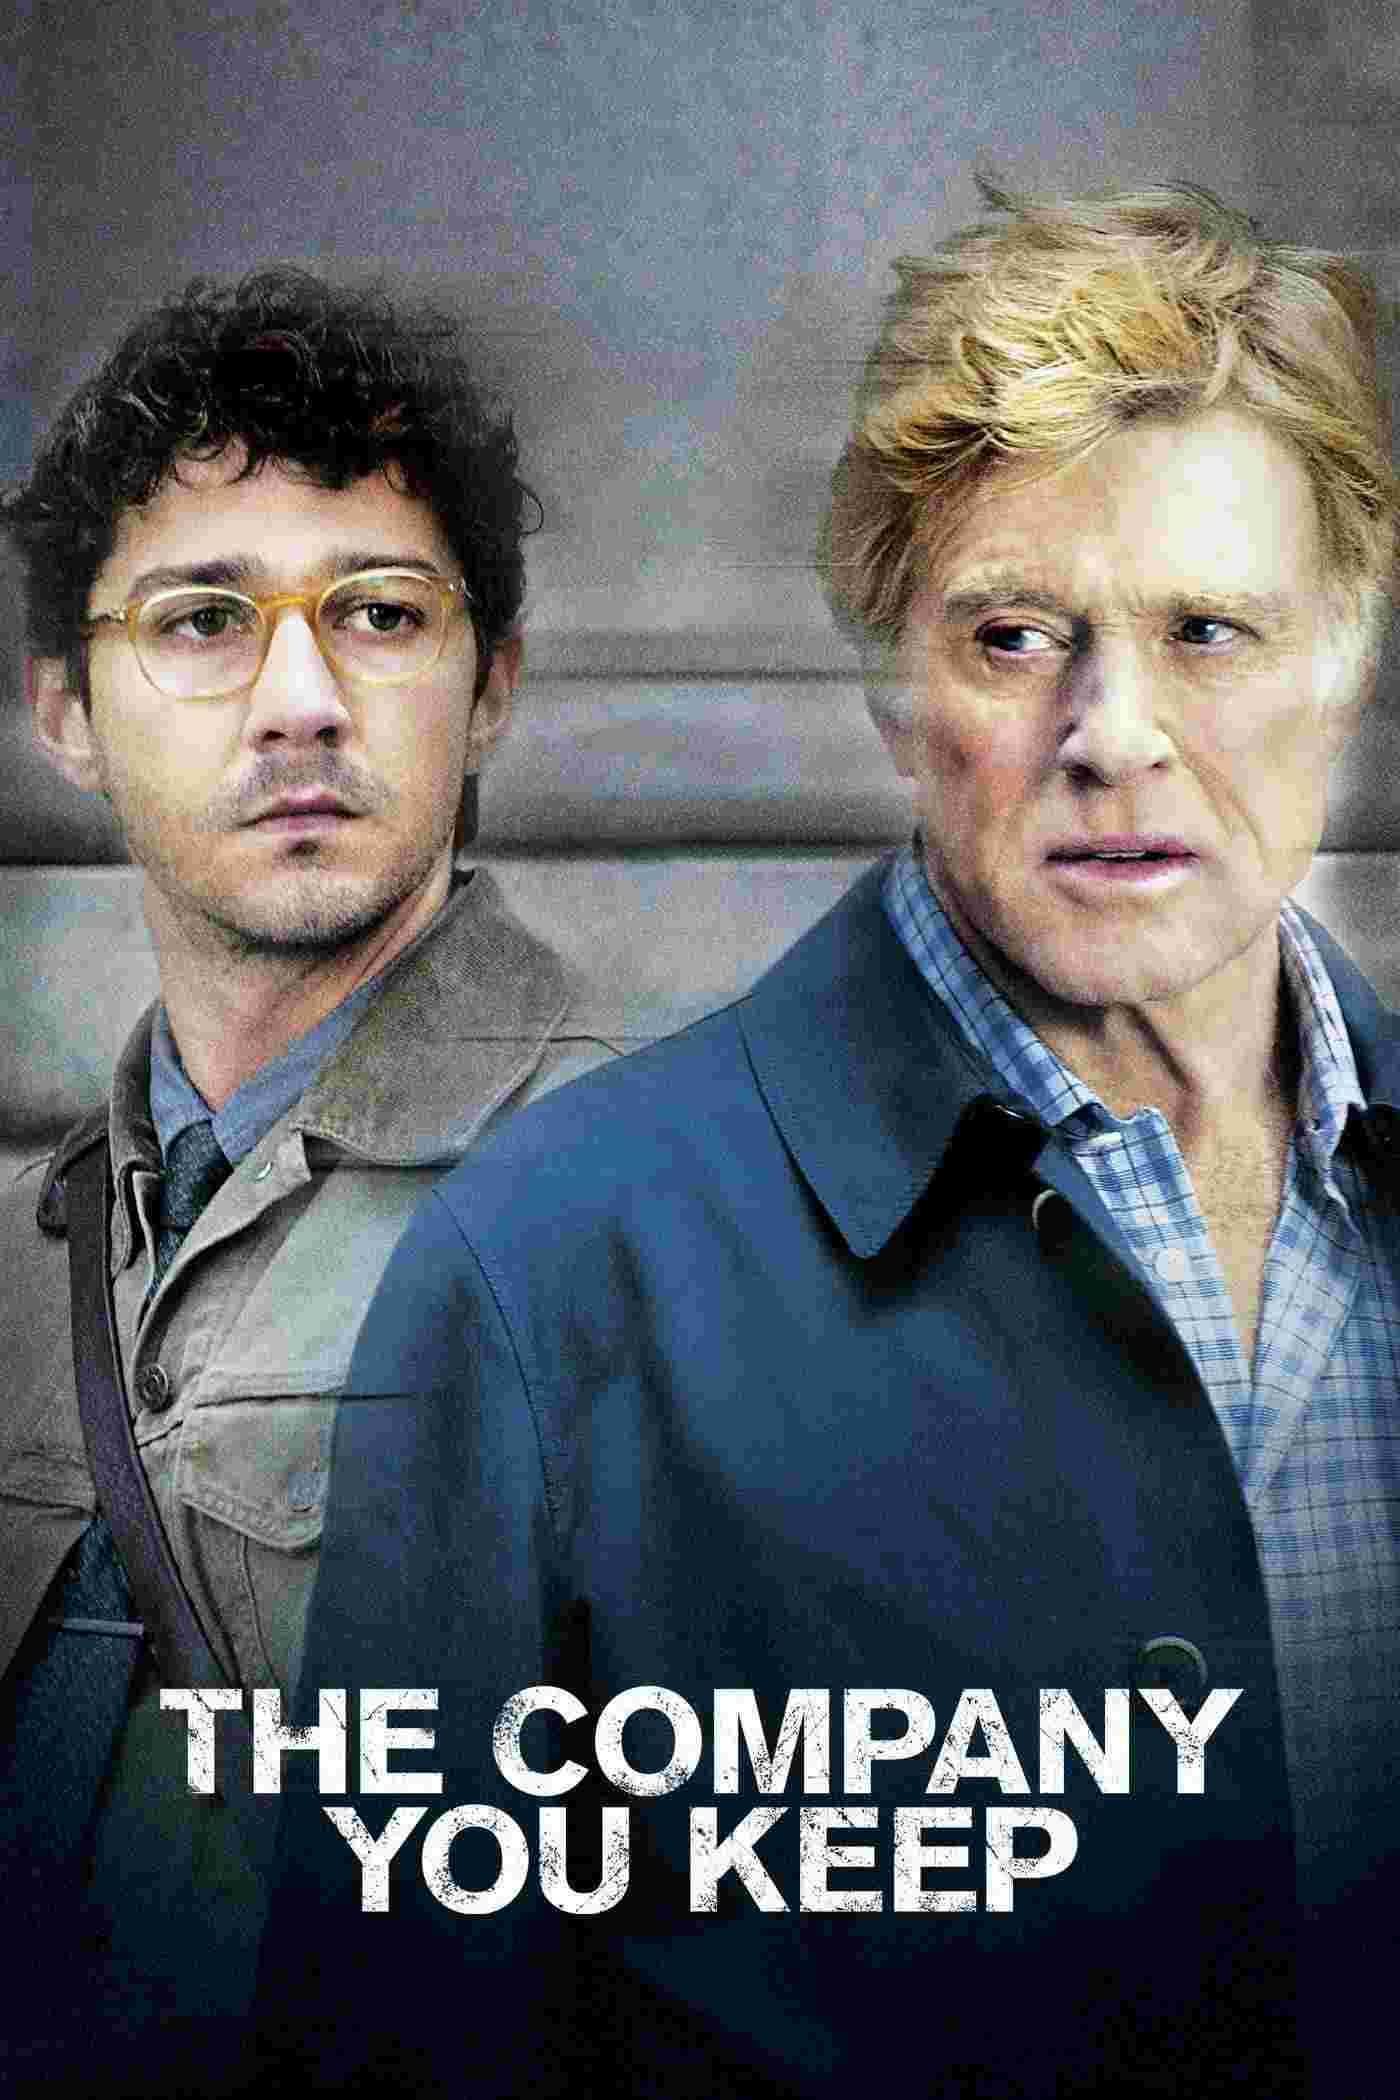 The Company You Keep (2012) Robert Redford